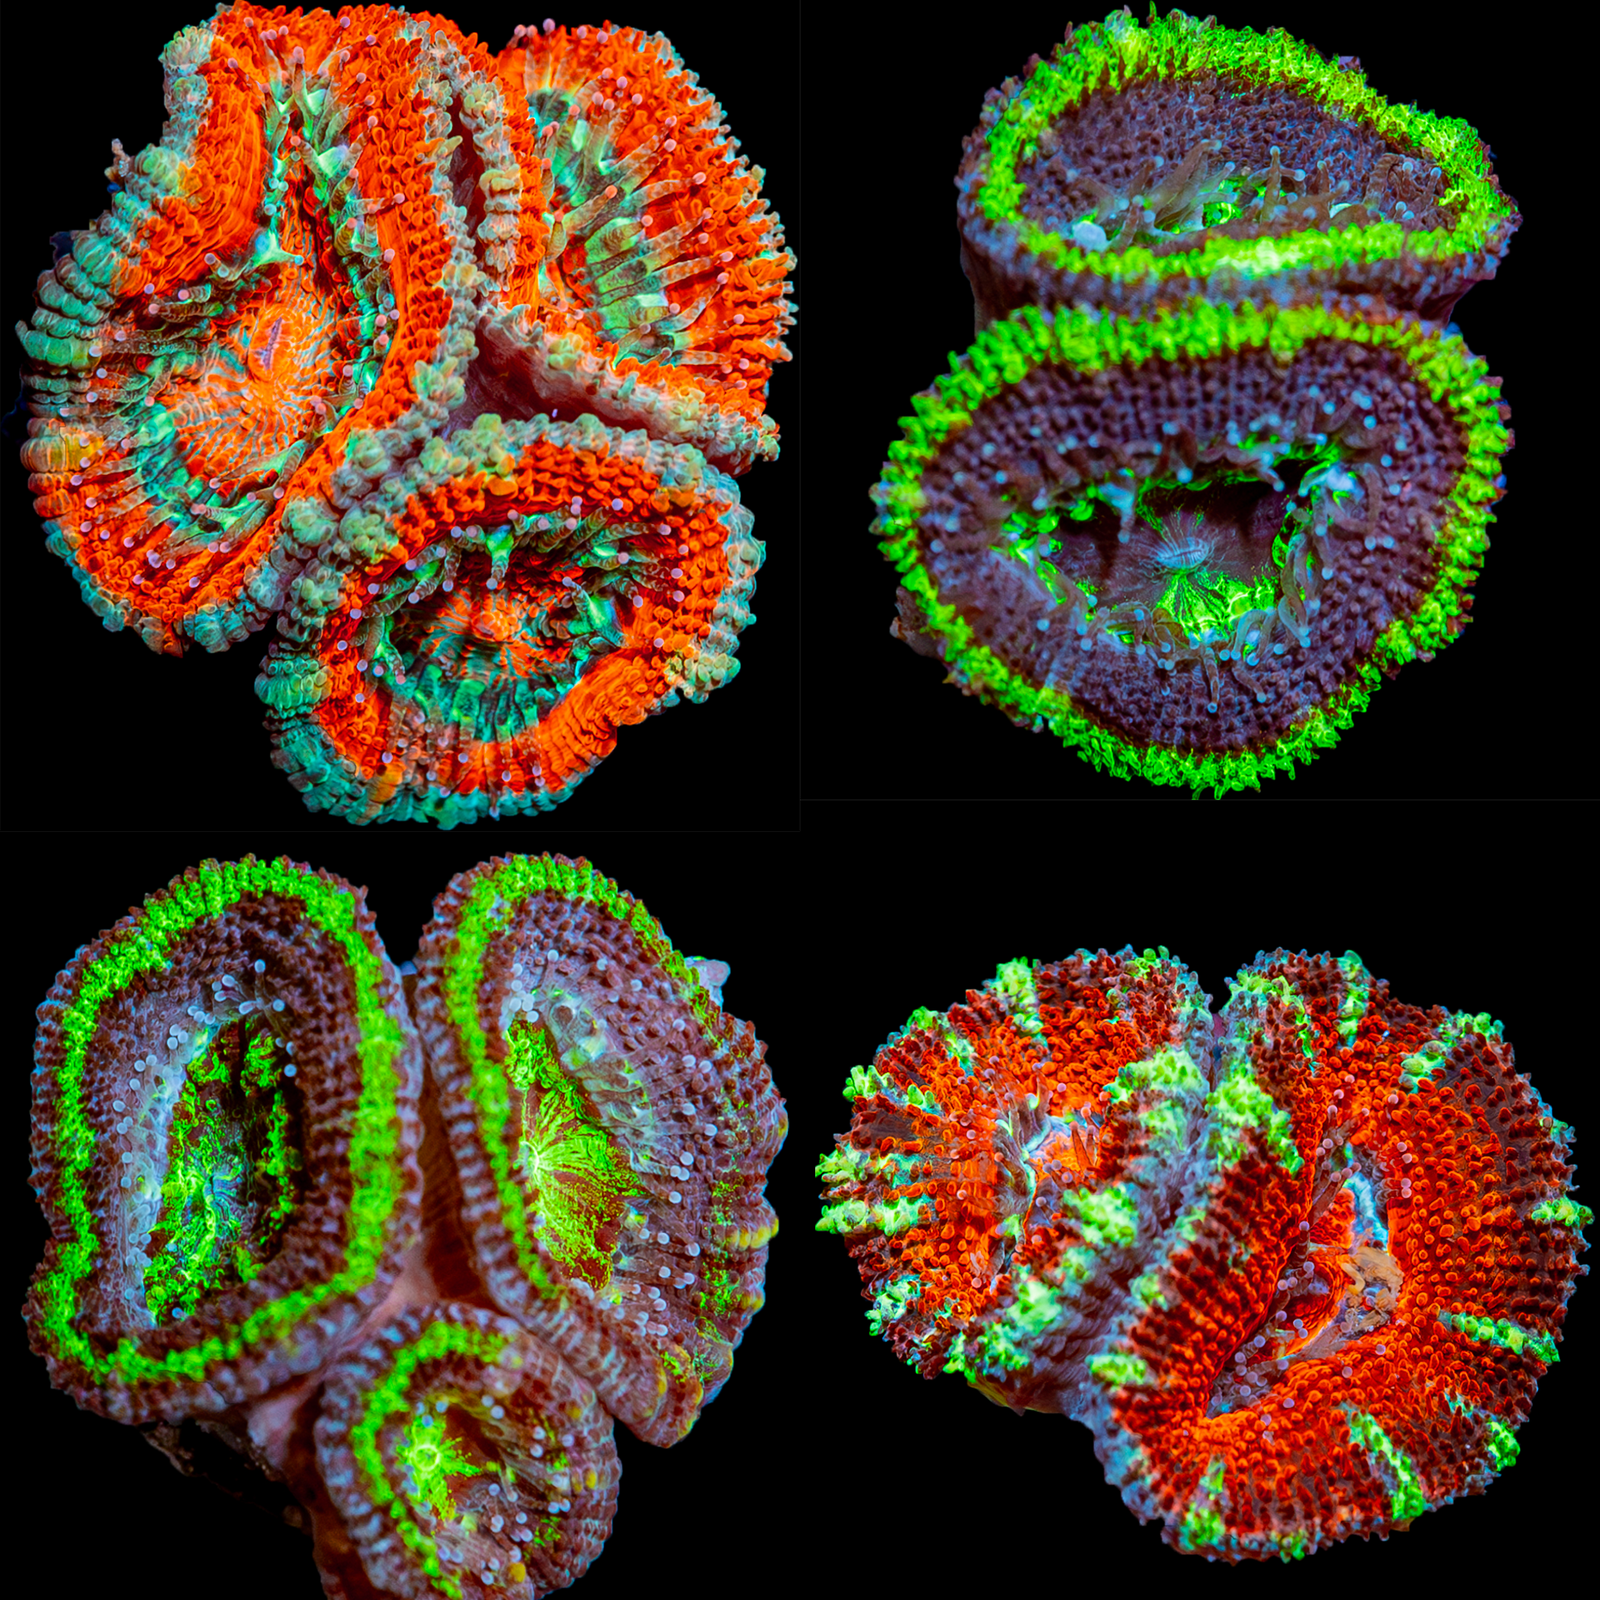 Collection of Acan/Micromussa corals featured in an Acan pack, perfect for coral sales. The image displays a variety of colors and textures: top left shows orange and green, top right showcases brown and green, bottom left features green and brown, and bottom right highlights red and orange, all vibrant and ideal for enhancing aquarium aesthetics.